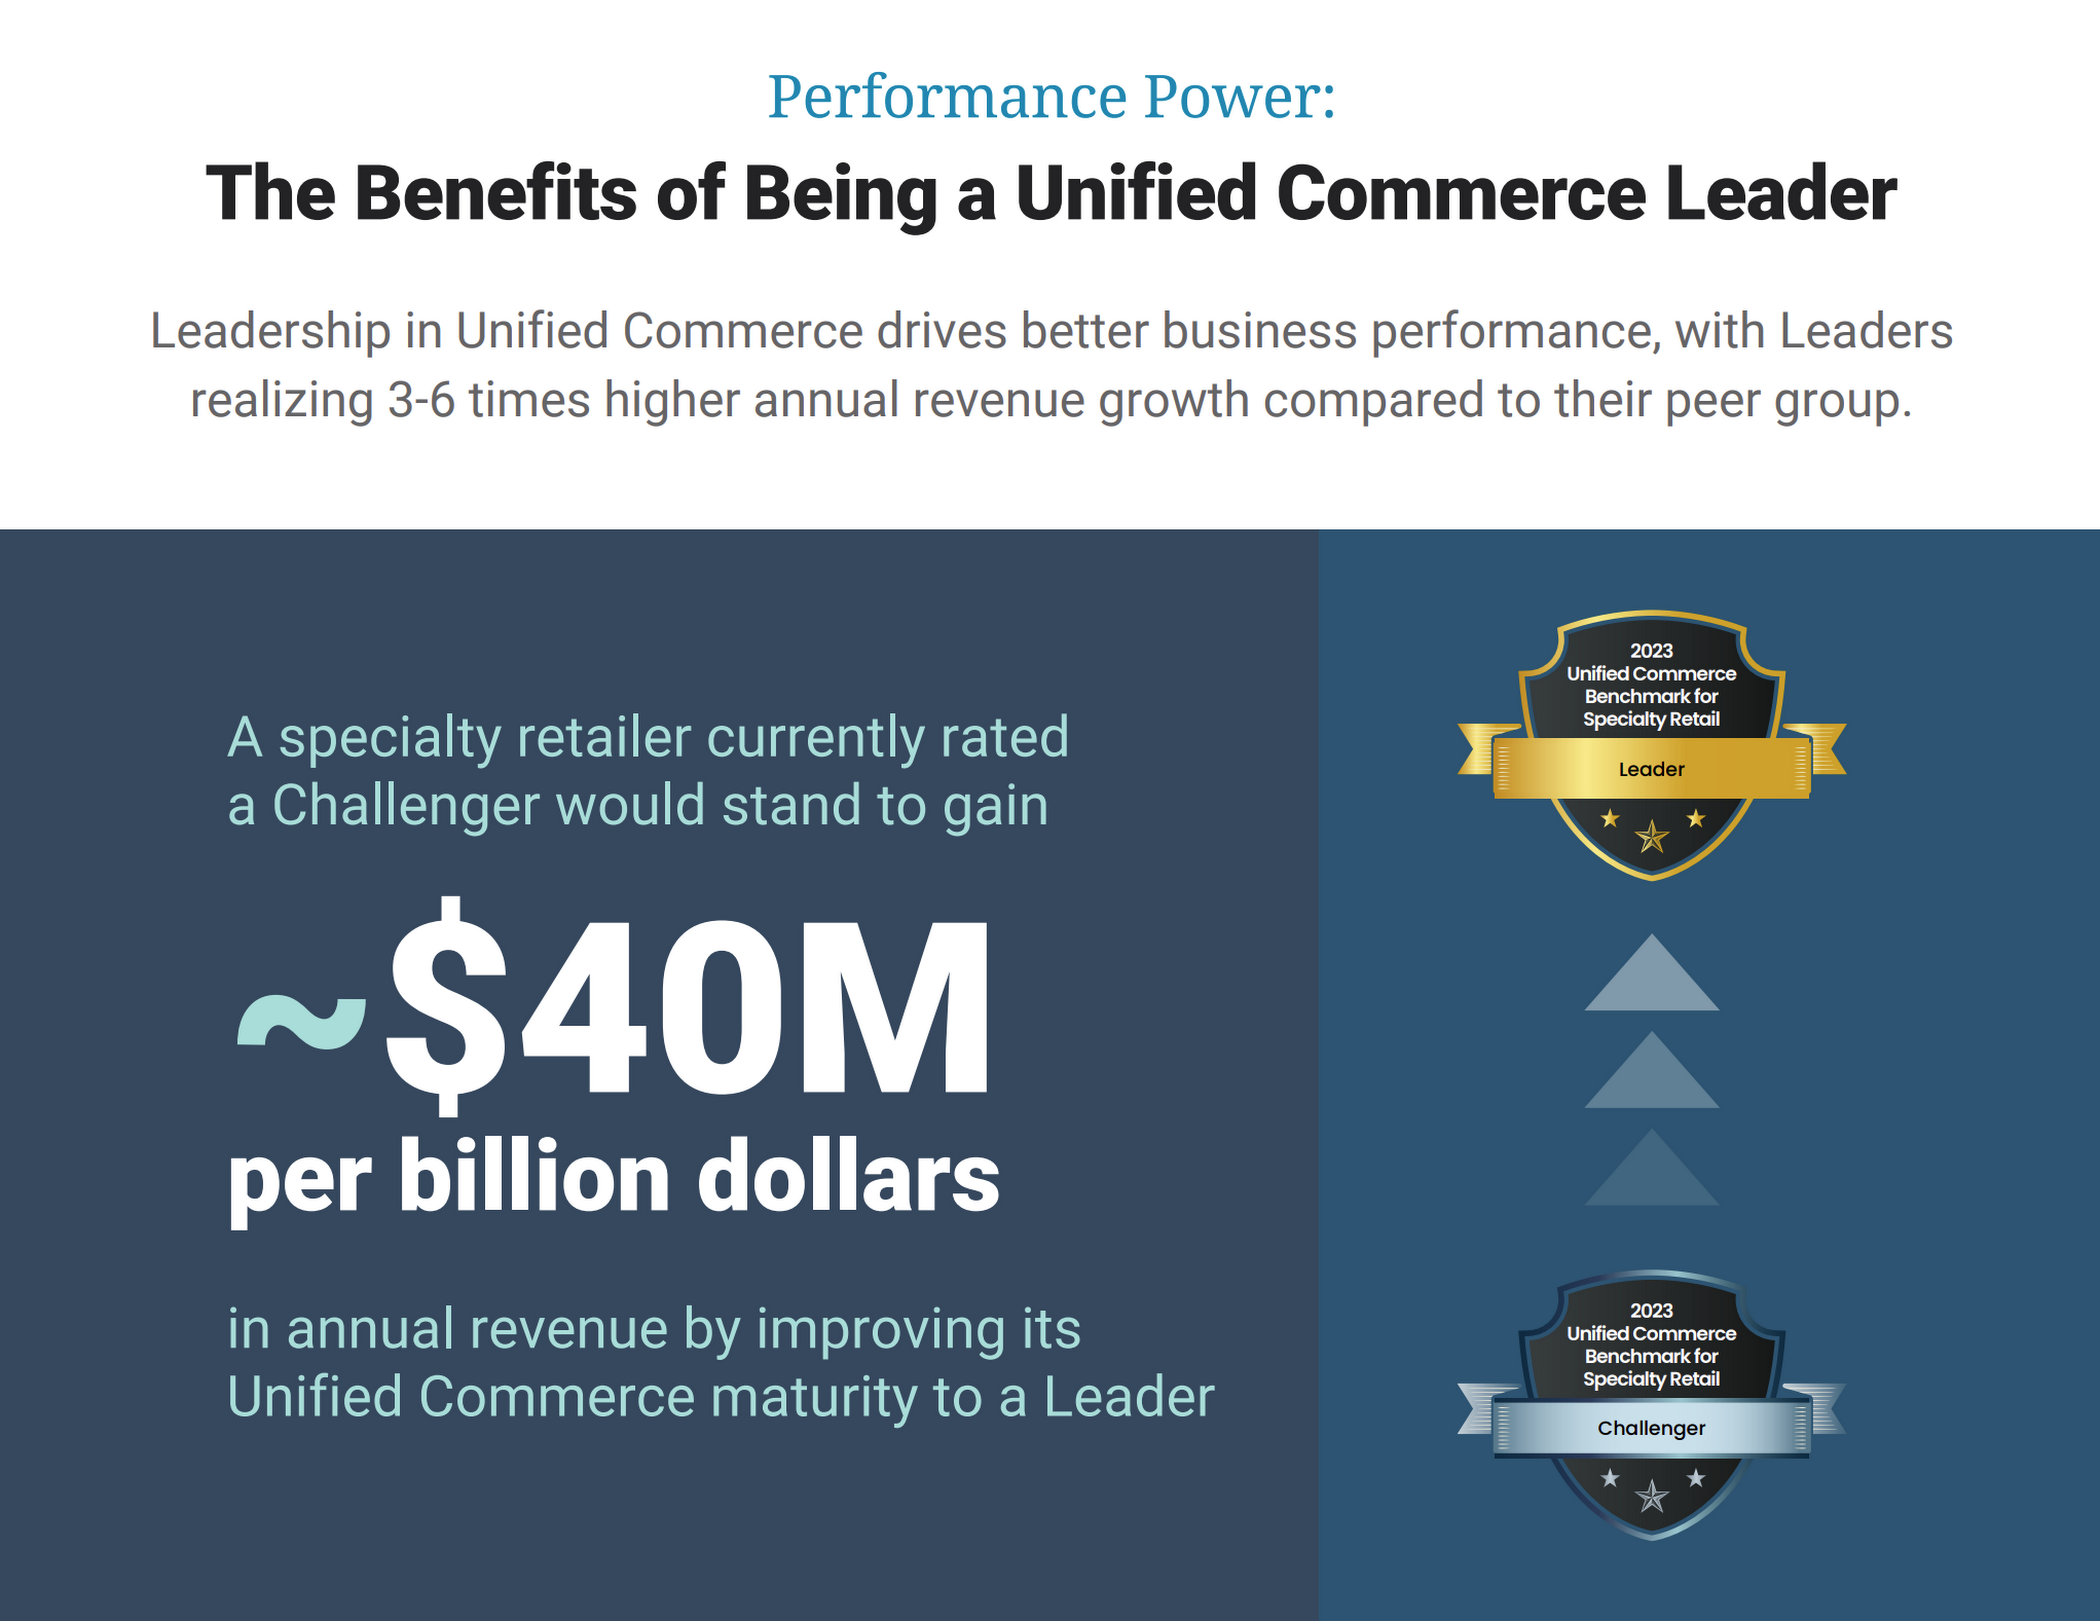 Top takeaways from the Unified Commerce Benchmark for Specialty Retail 2023